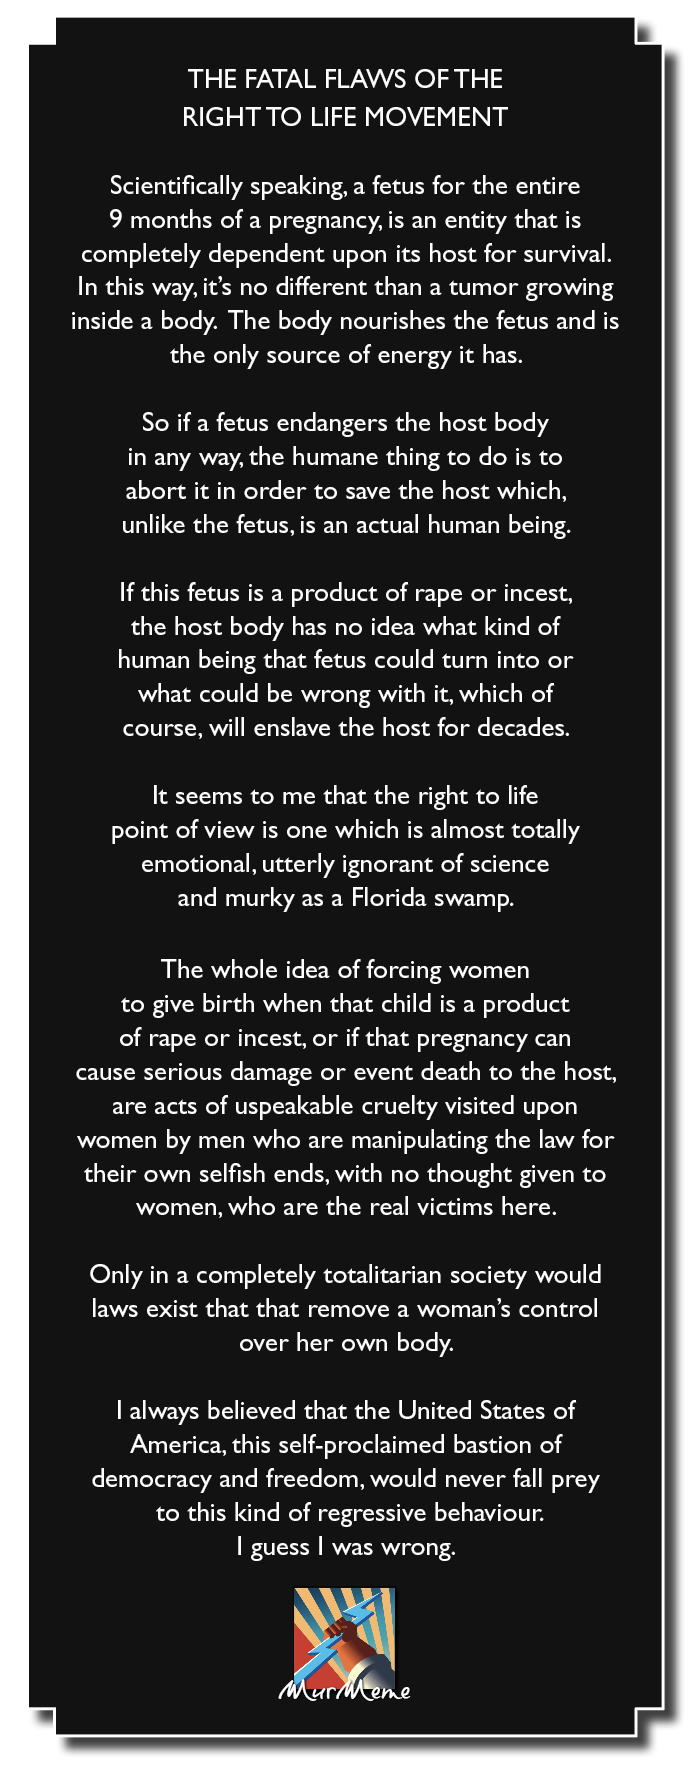 THE FATAL FLAWS OF THE
RIGHT TO LIFE MOVEMENT

Scientifically speaking, a fetus for the entire
9 months of a pregnancy, is an entity that is
completely dependent upon its host for survival.
In this way, it's no different than a tumor growing
inside a body. The body nourishes the fetus and is
the only source of energy it has.

So if a fetus endangers the host body
in any way, the humane thing to do is to
abort it in order to save the host which,
unlike the fetus, is an actual human being.

If this fetus is a product of rape or incest,
the host body has no idea what kind of
human being that fetus could turn into or
what could be wrong with it, which of
course, will enslave the host for decades.

It seems to me that the right to life
point of view is one which is almost totally
emotional, utterly ignorant of science
and murky as a Florida swamp.

The whole idea of forcing women
to give birth when that child is a product
of rape or incest, or if that pregnancy can
cause serious damage or event death to the host,
are acts of uspeakable cruelty visited upon
women by men who are manipulating the law for
their own selfish ends, with no thought given to
women, who are the real victims here.

Only in a completely totalitarian society would
laws exist that that remove a woman's control
over her own body.

| always believed that the United States of
America, this self-proclaimed bastion of
democracy and freedom, would never fall prey
to this kind of regressive behaviour.
| guess | was wrong.

x

ne